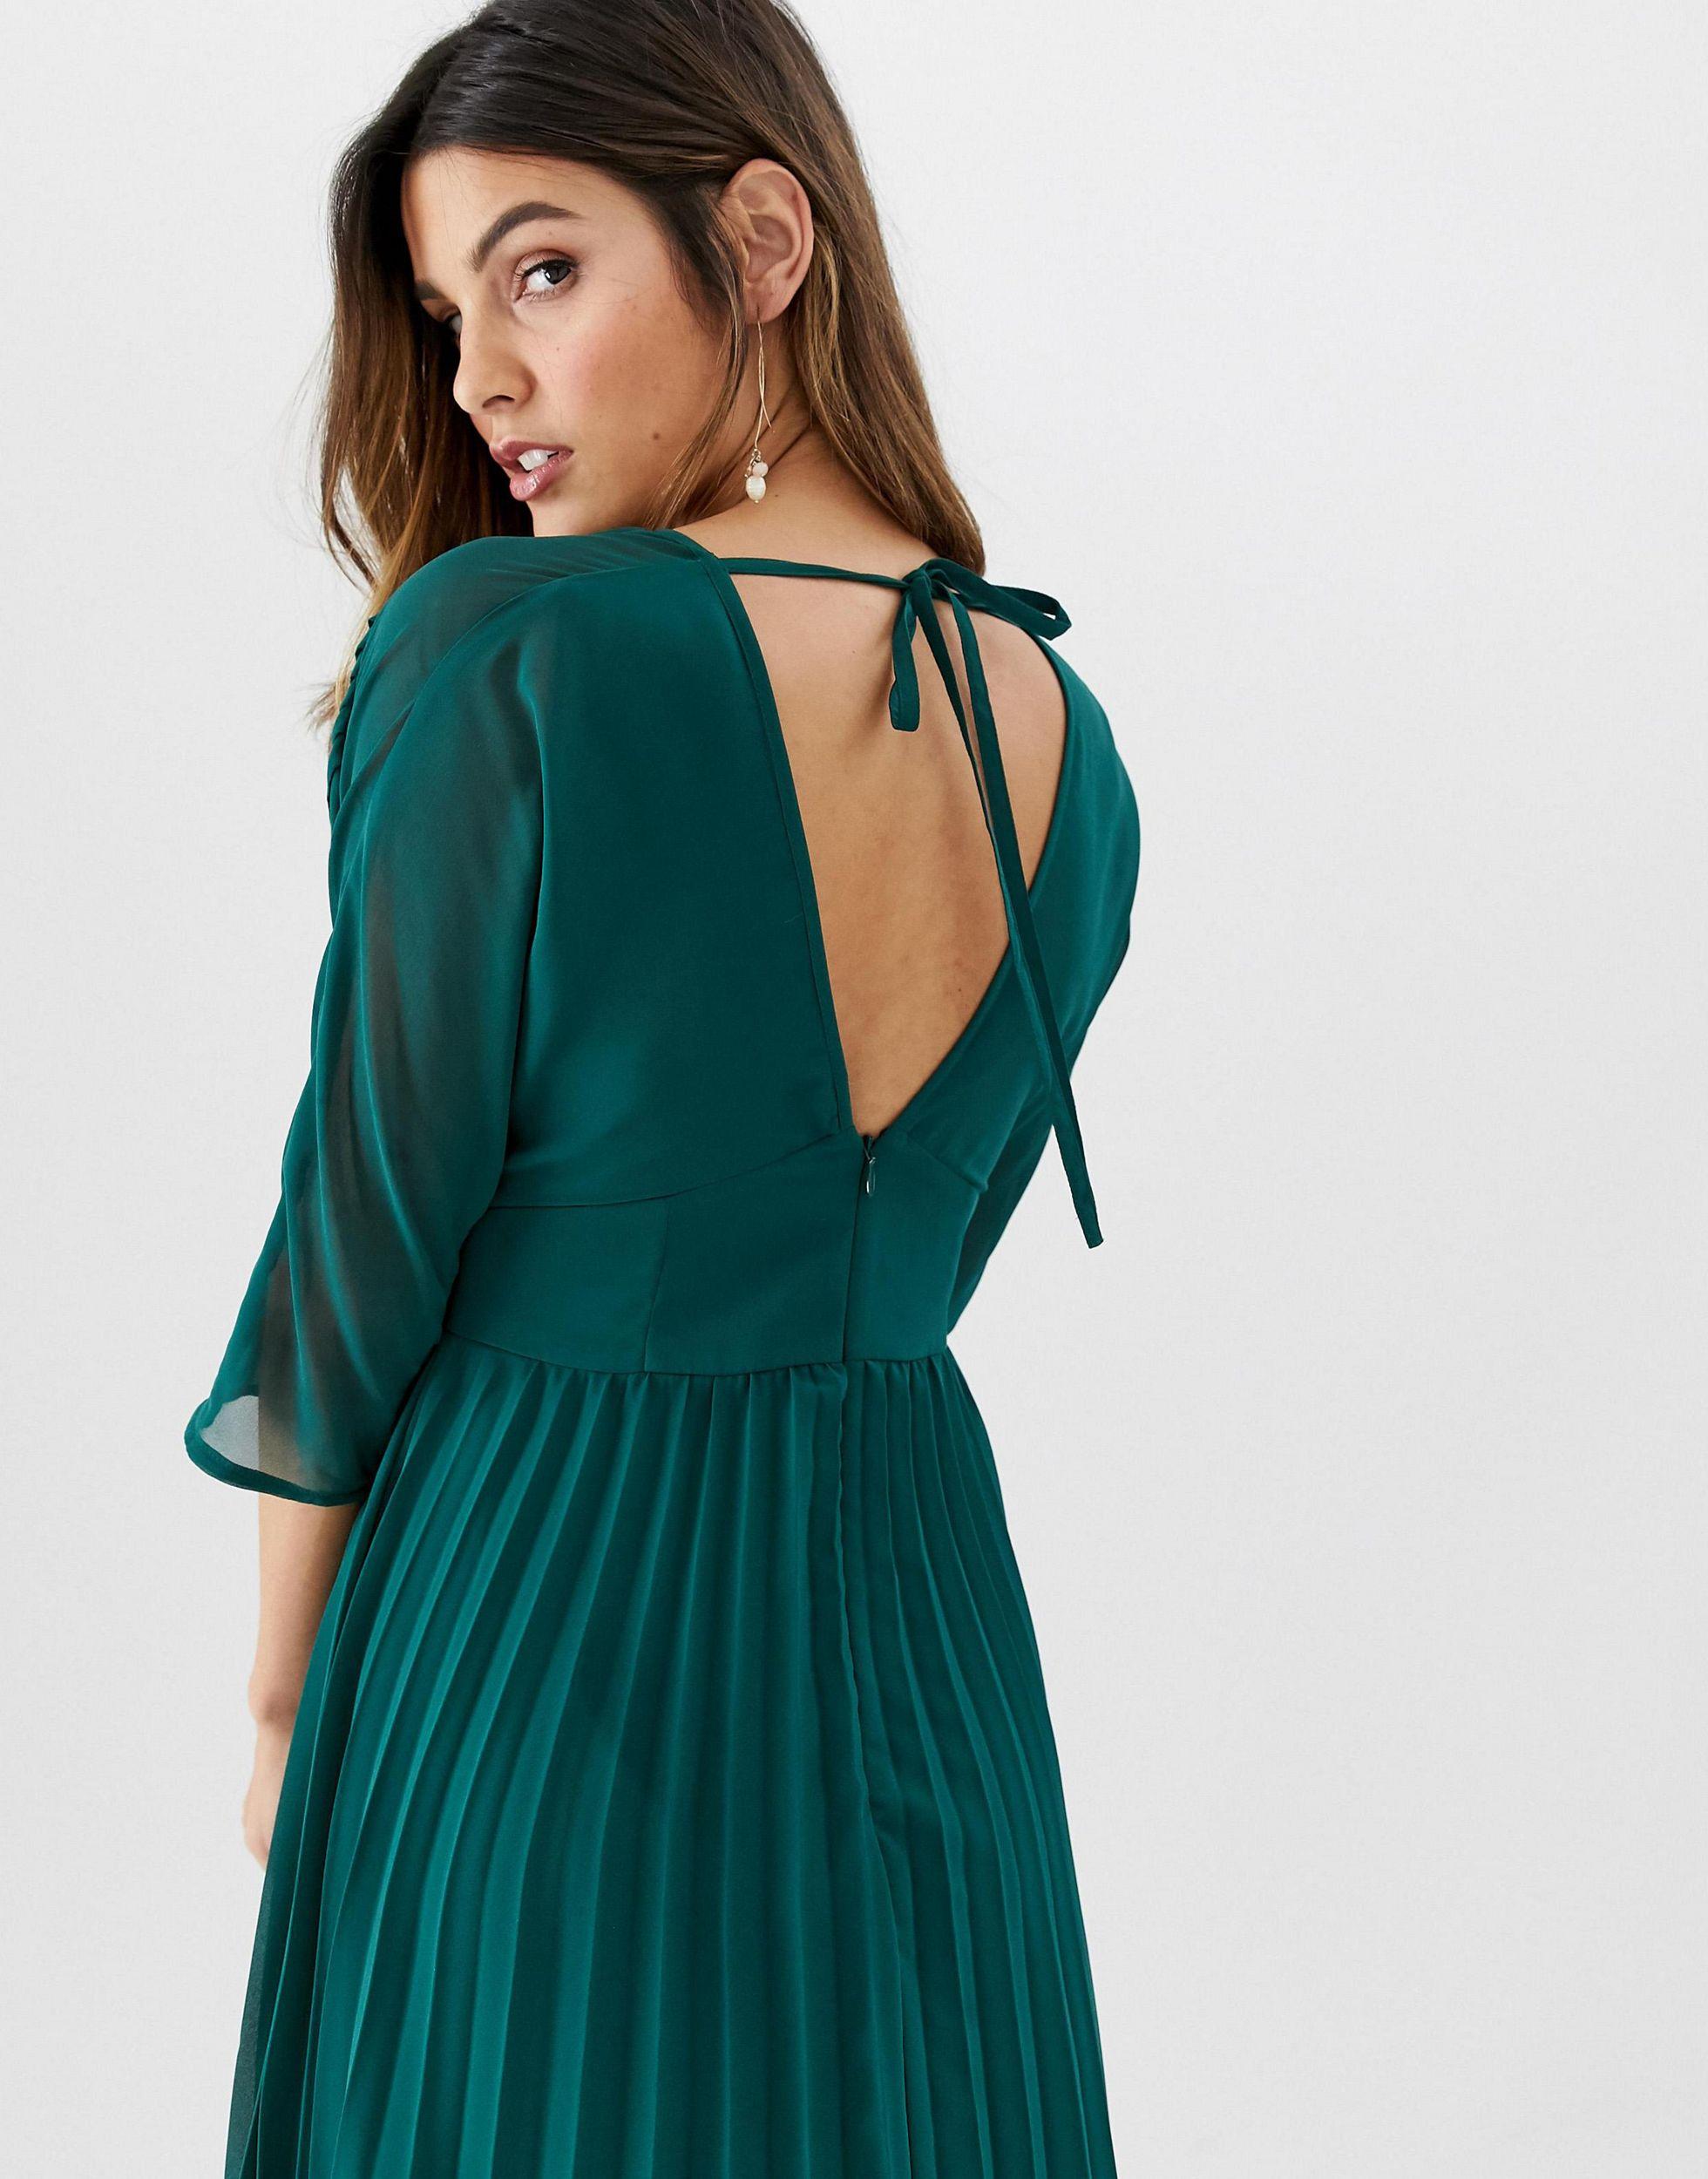 ASOS Denim Pleated Midi Dress With Batwing Sleeves in Green - Lyst